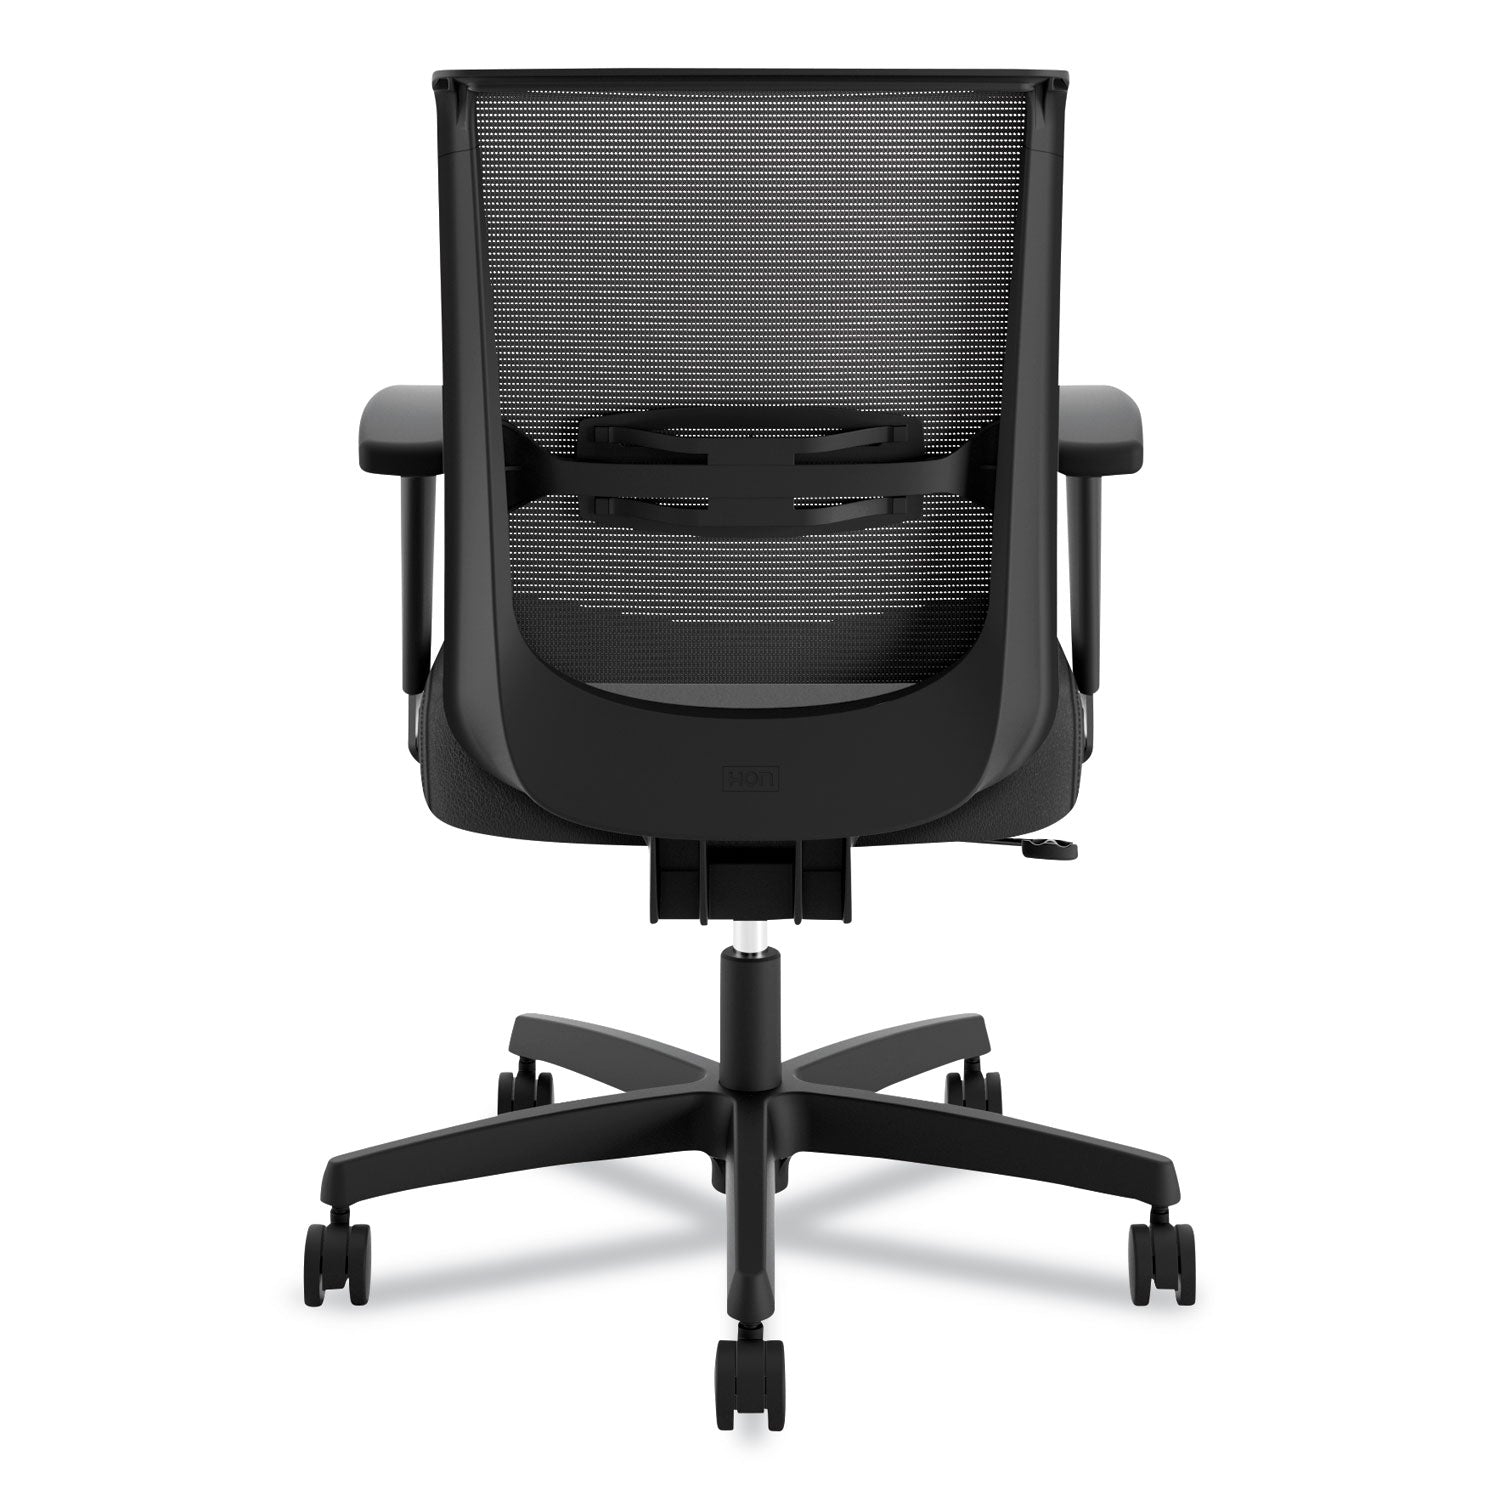 convergence-mid-back-task-chair-swivel-tilt-supports-up-to-275-lb-1575-to-2013-seat-height-black_honcms1aur10 - 5